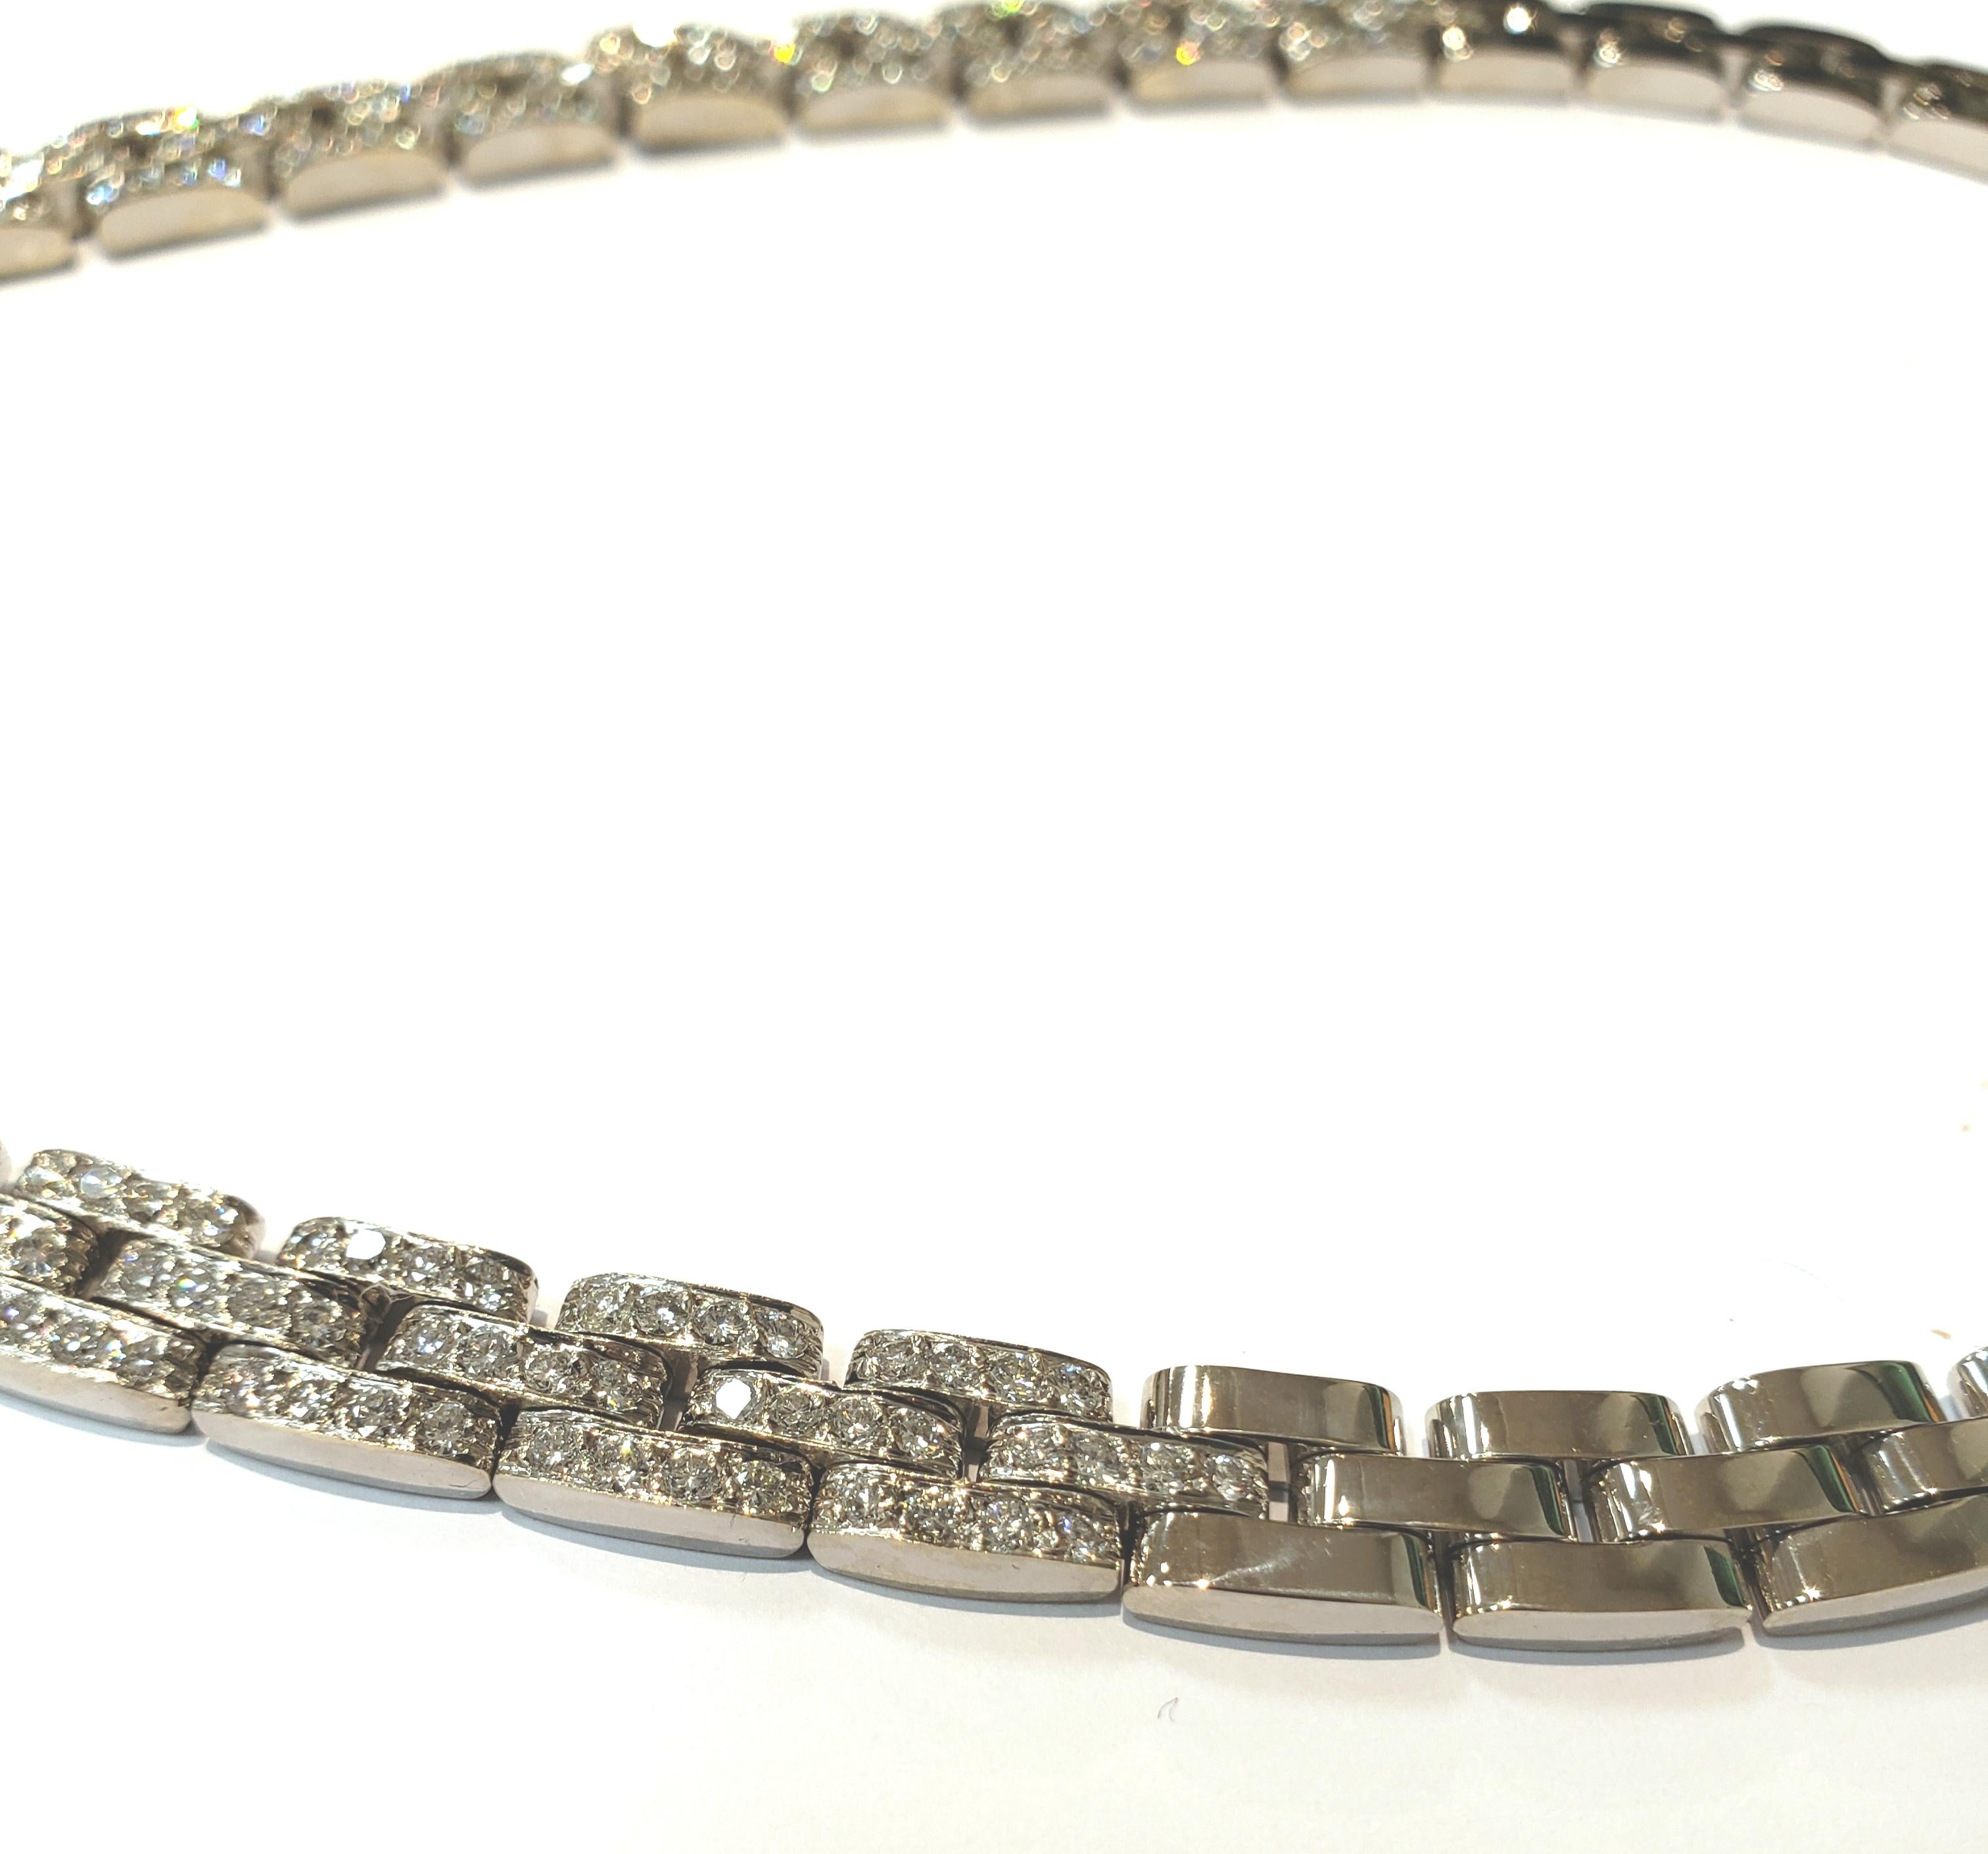 A beautifully made 18 karat white gold interlocking basket weave link, with a pave diamond front. 
Necklace has 20 plain white gold links, & 22 pave diamond links. Diamonds are all full cut stones.
Total diamond weight is 7.20 carats. Necklace is